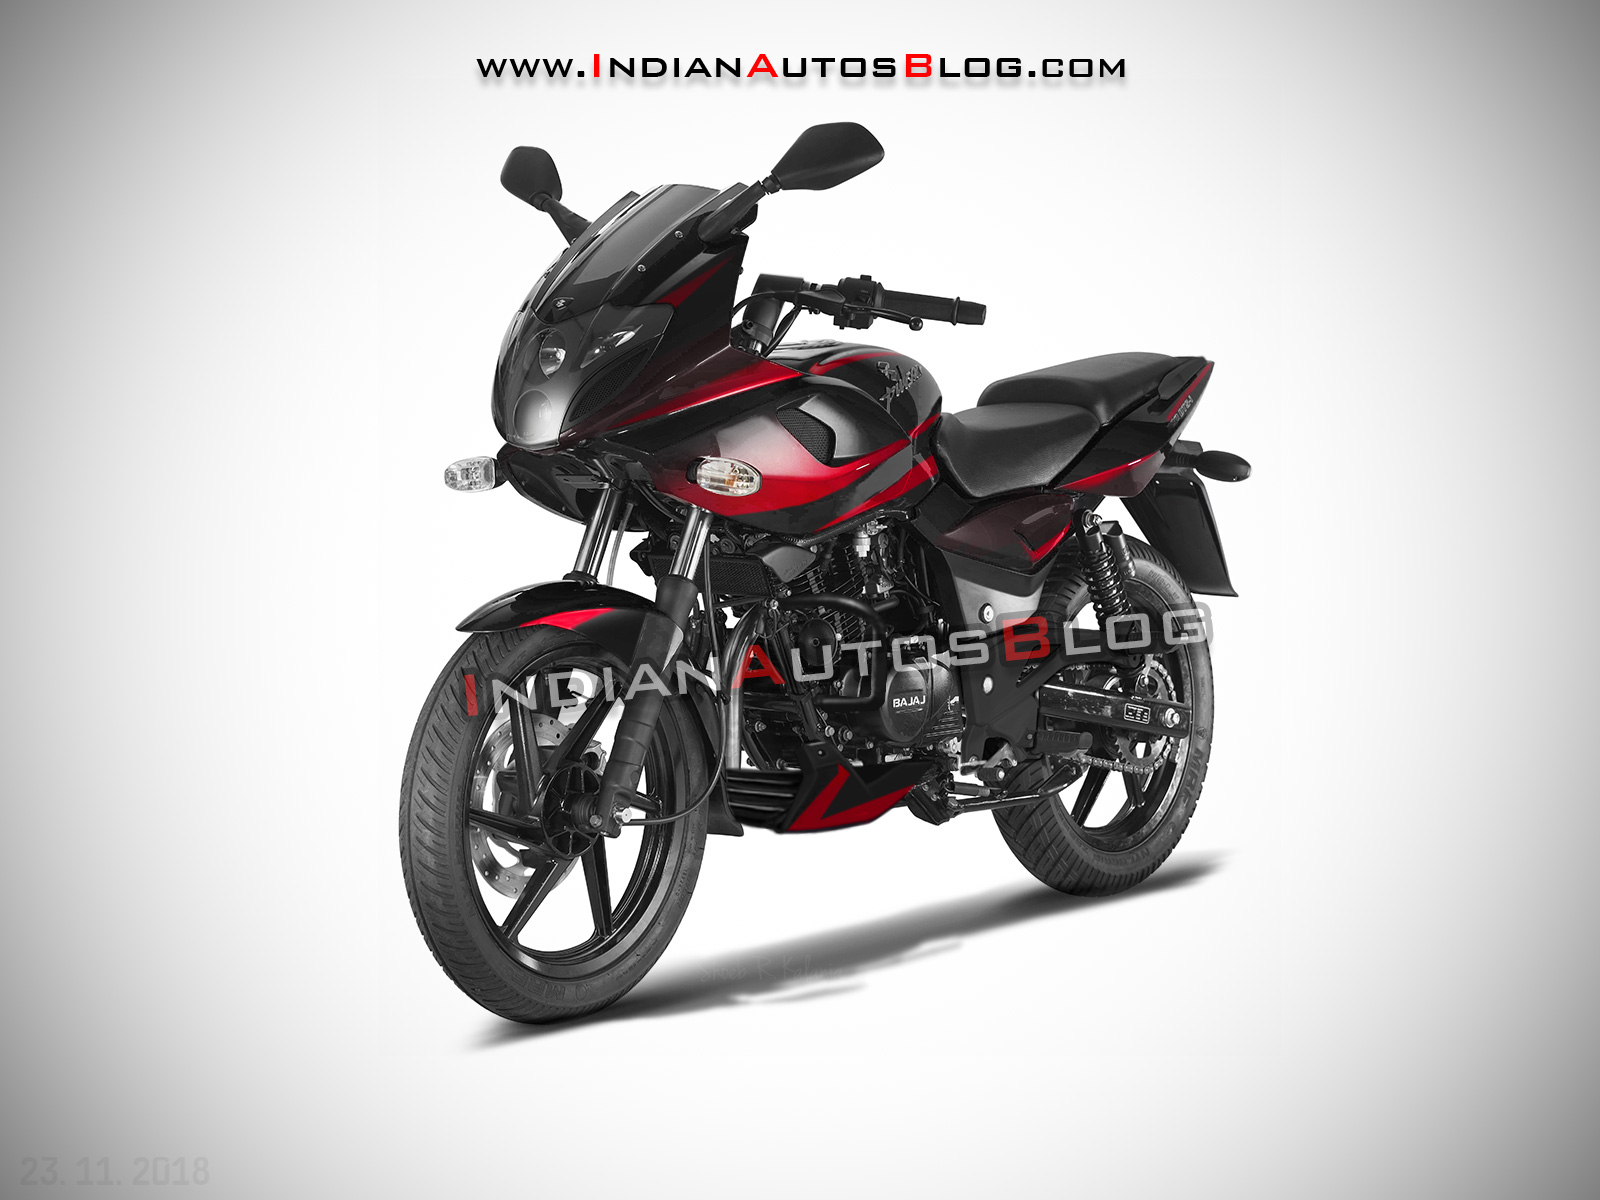 2019 Bajaj Pulsar 150 Abs Spied Testing In India For The First Time